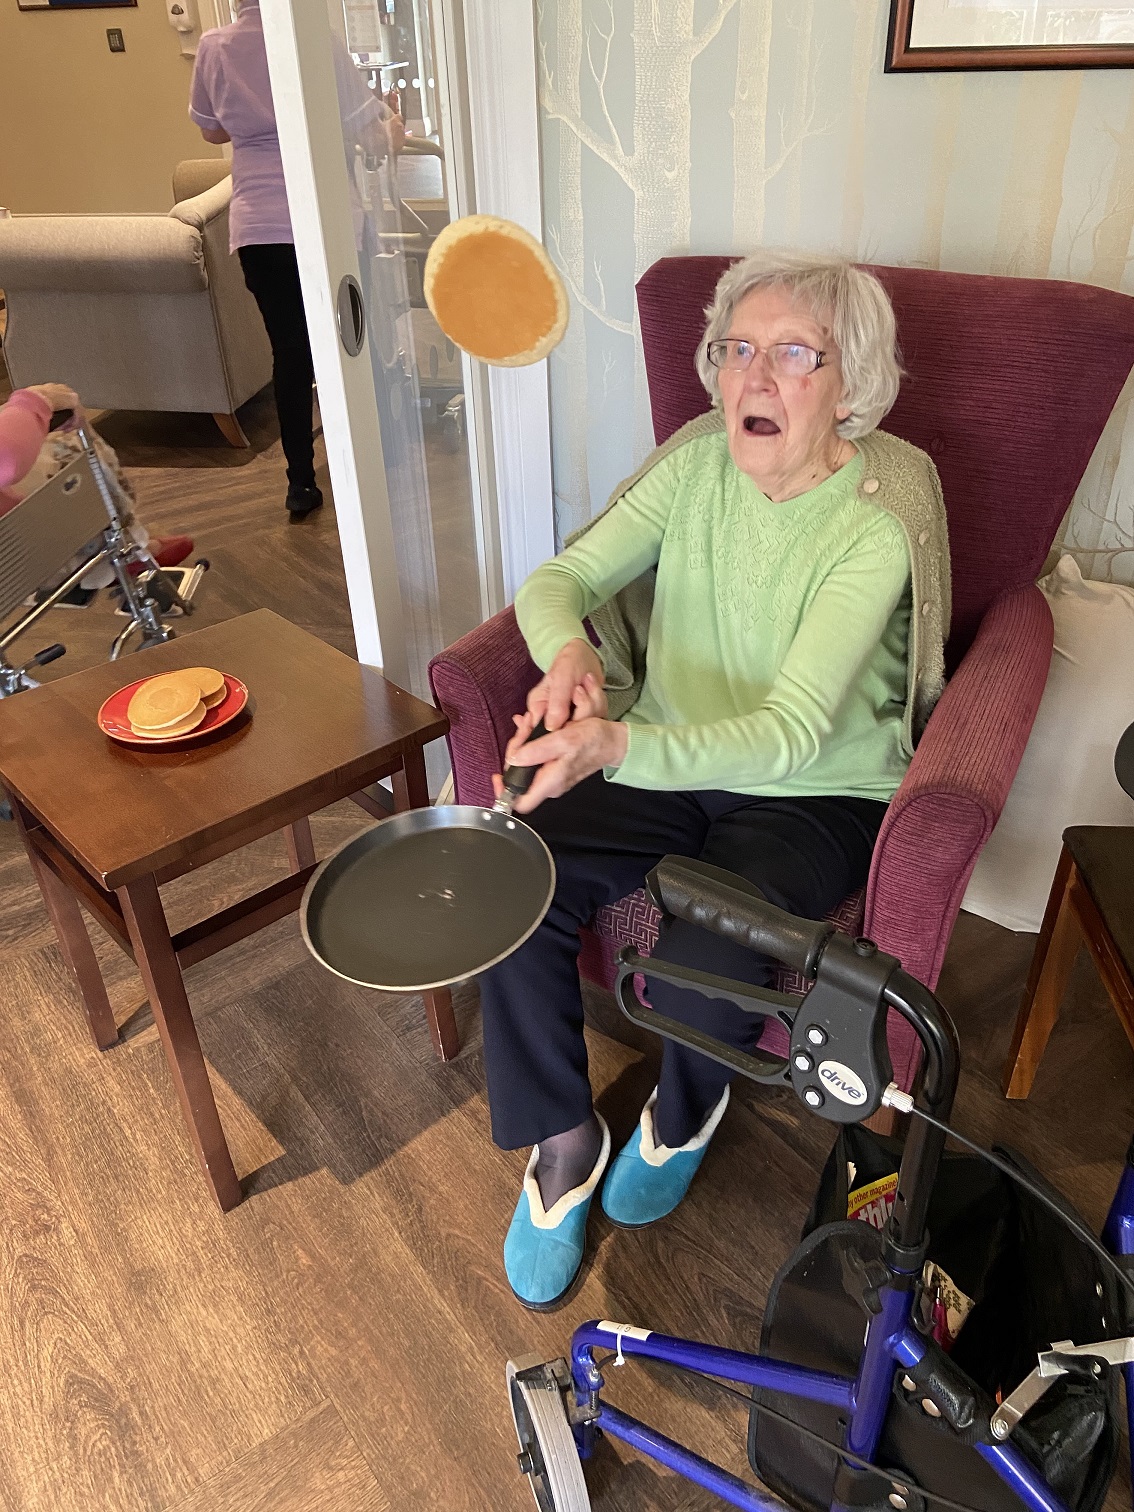 pancake day activities at encore care homes